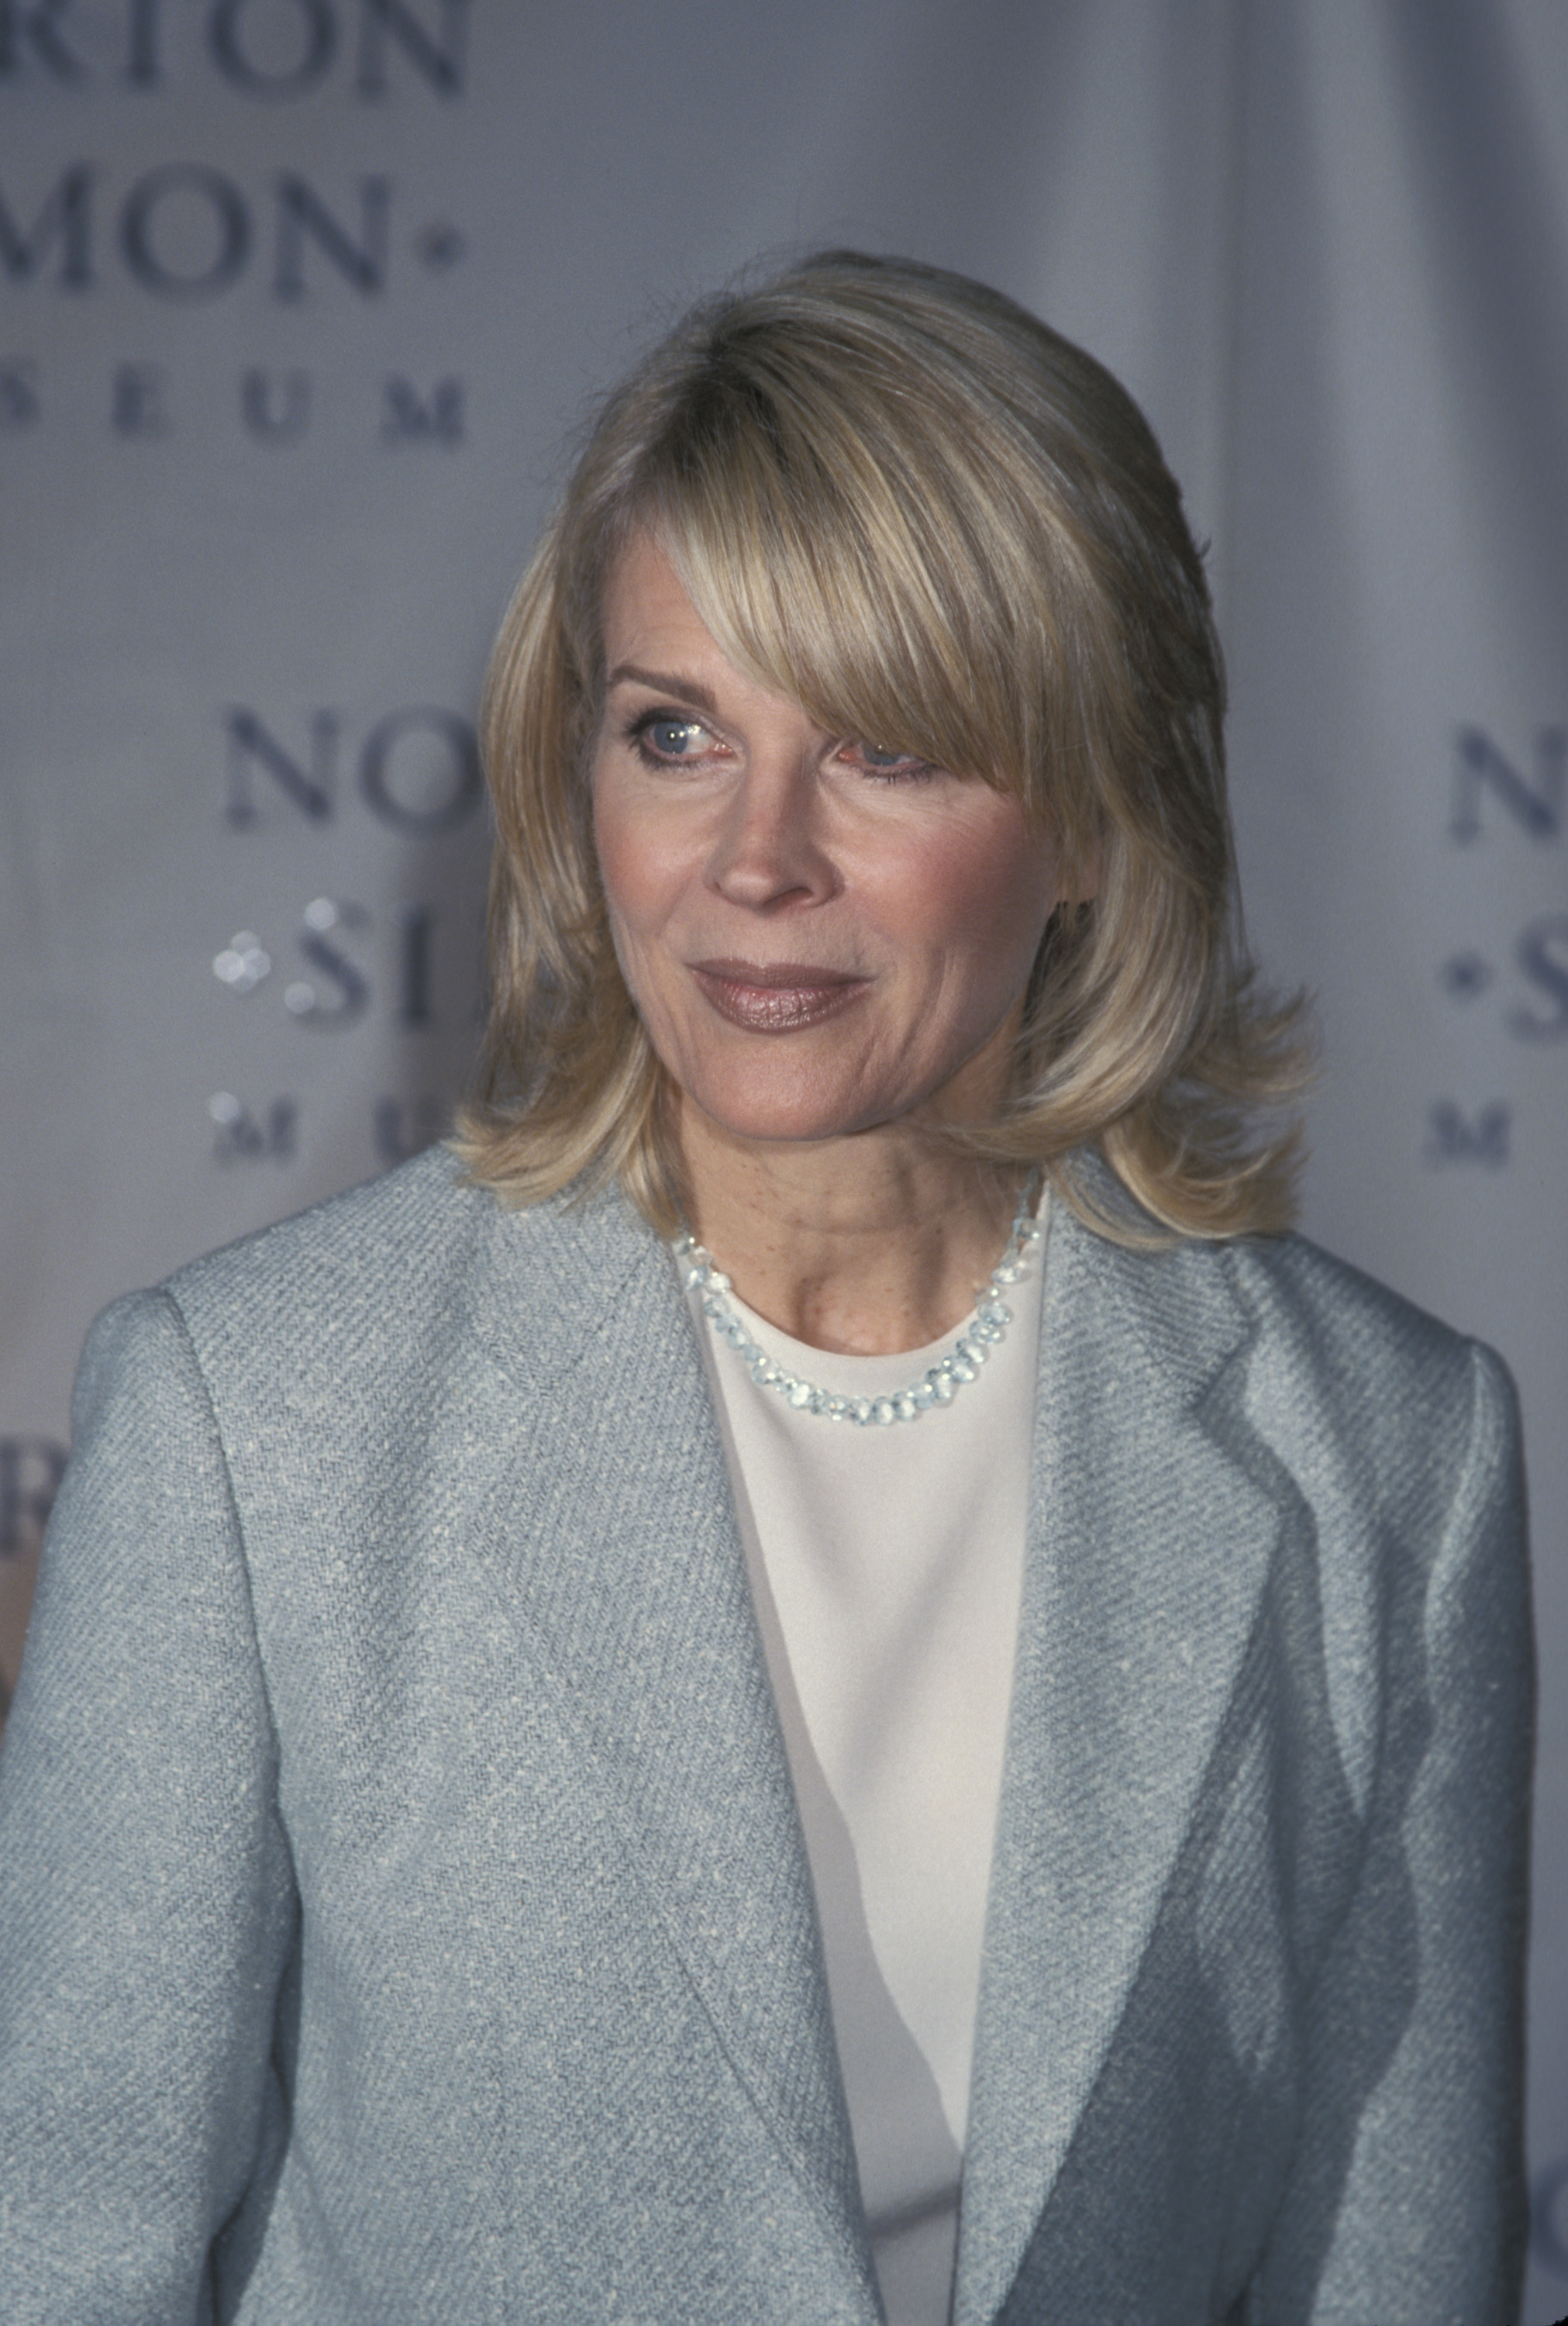 Candice Bergen during the opening of "The Art of Norton Simon" at Norton Simon Museum in Pasadena, California | Source: Getty Images